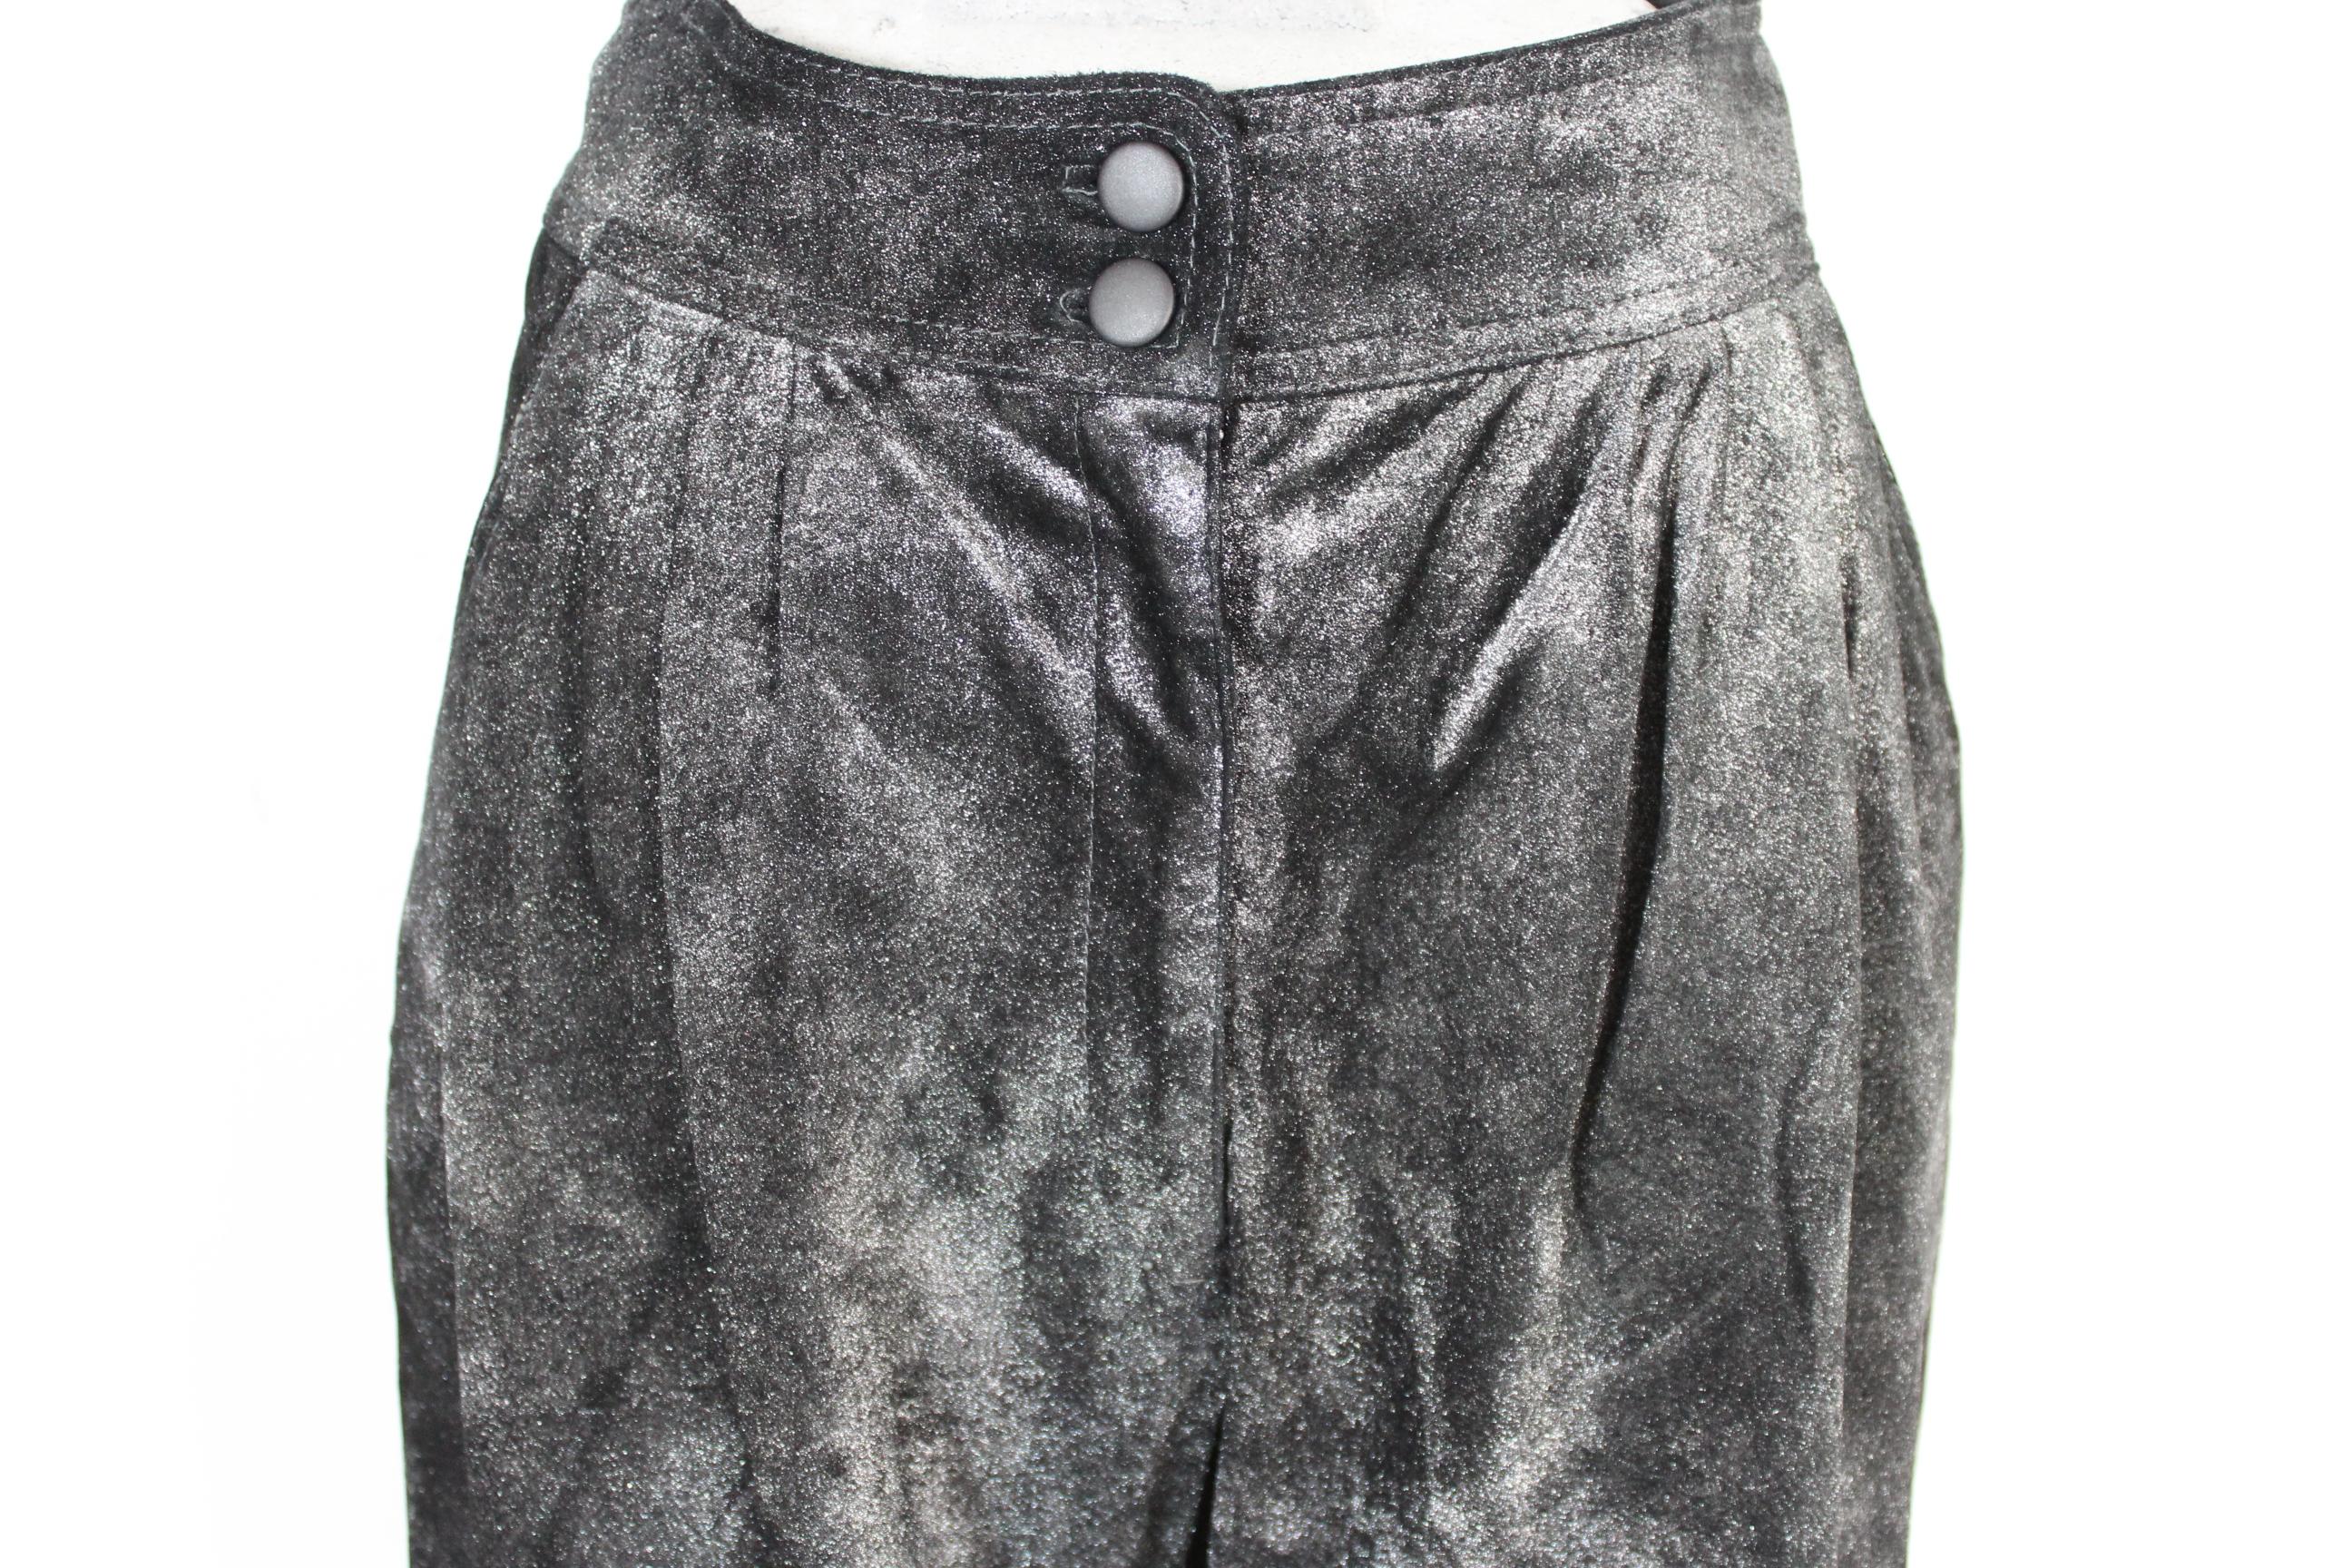 Krizia Black and Silver Pigskin Leather Lamè Iridescent Pants 1980s  Style NWT For Sale 1